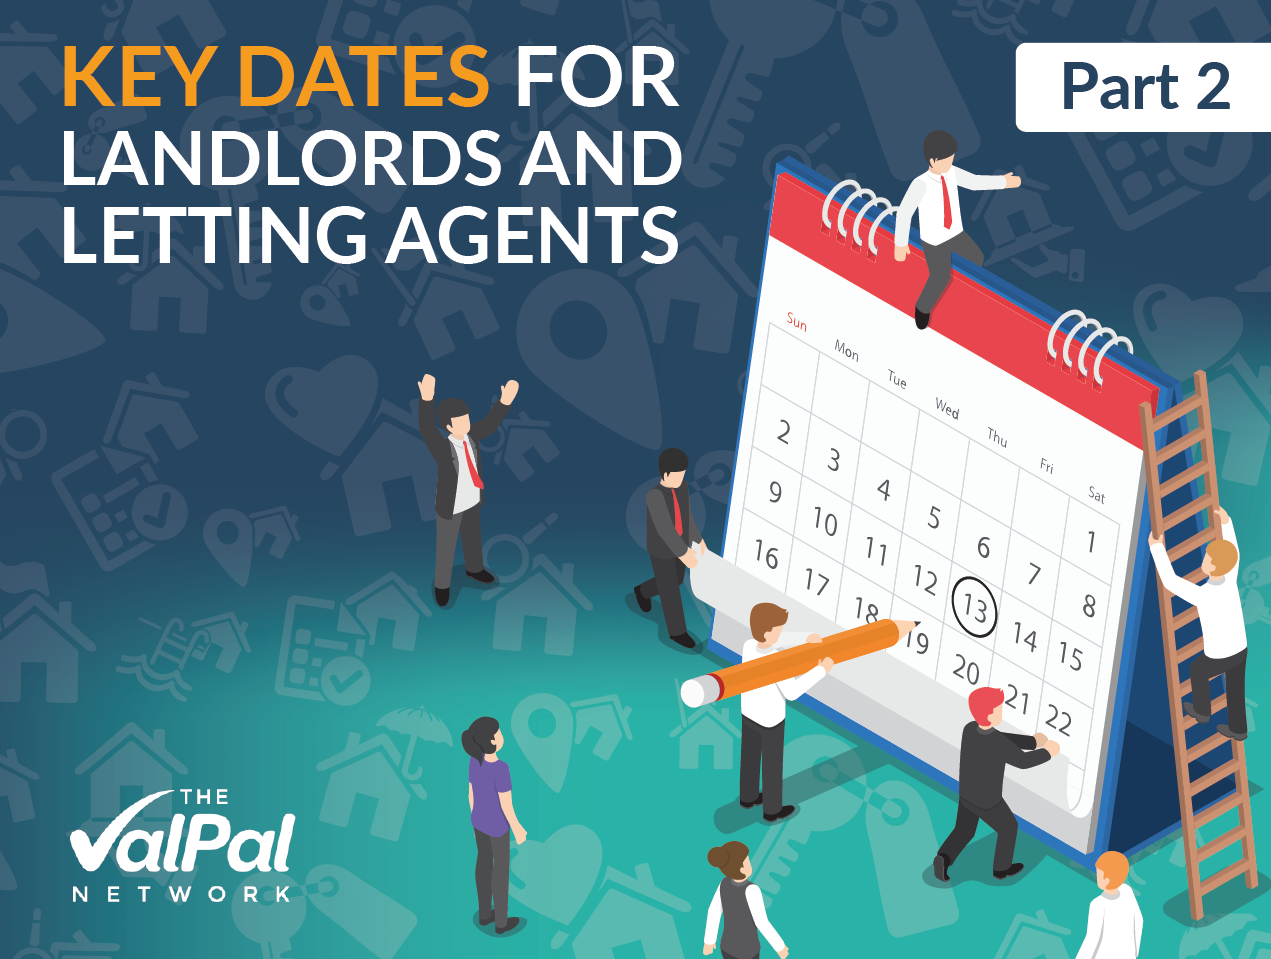 Part Two: Key dates for letting agents and landlords in 2021